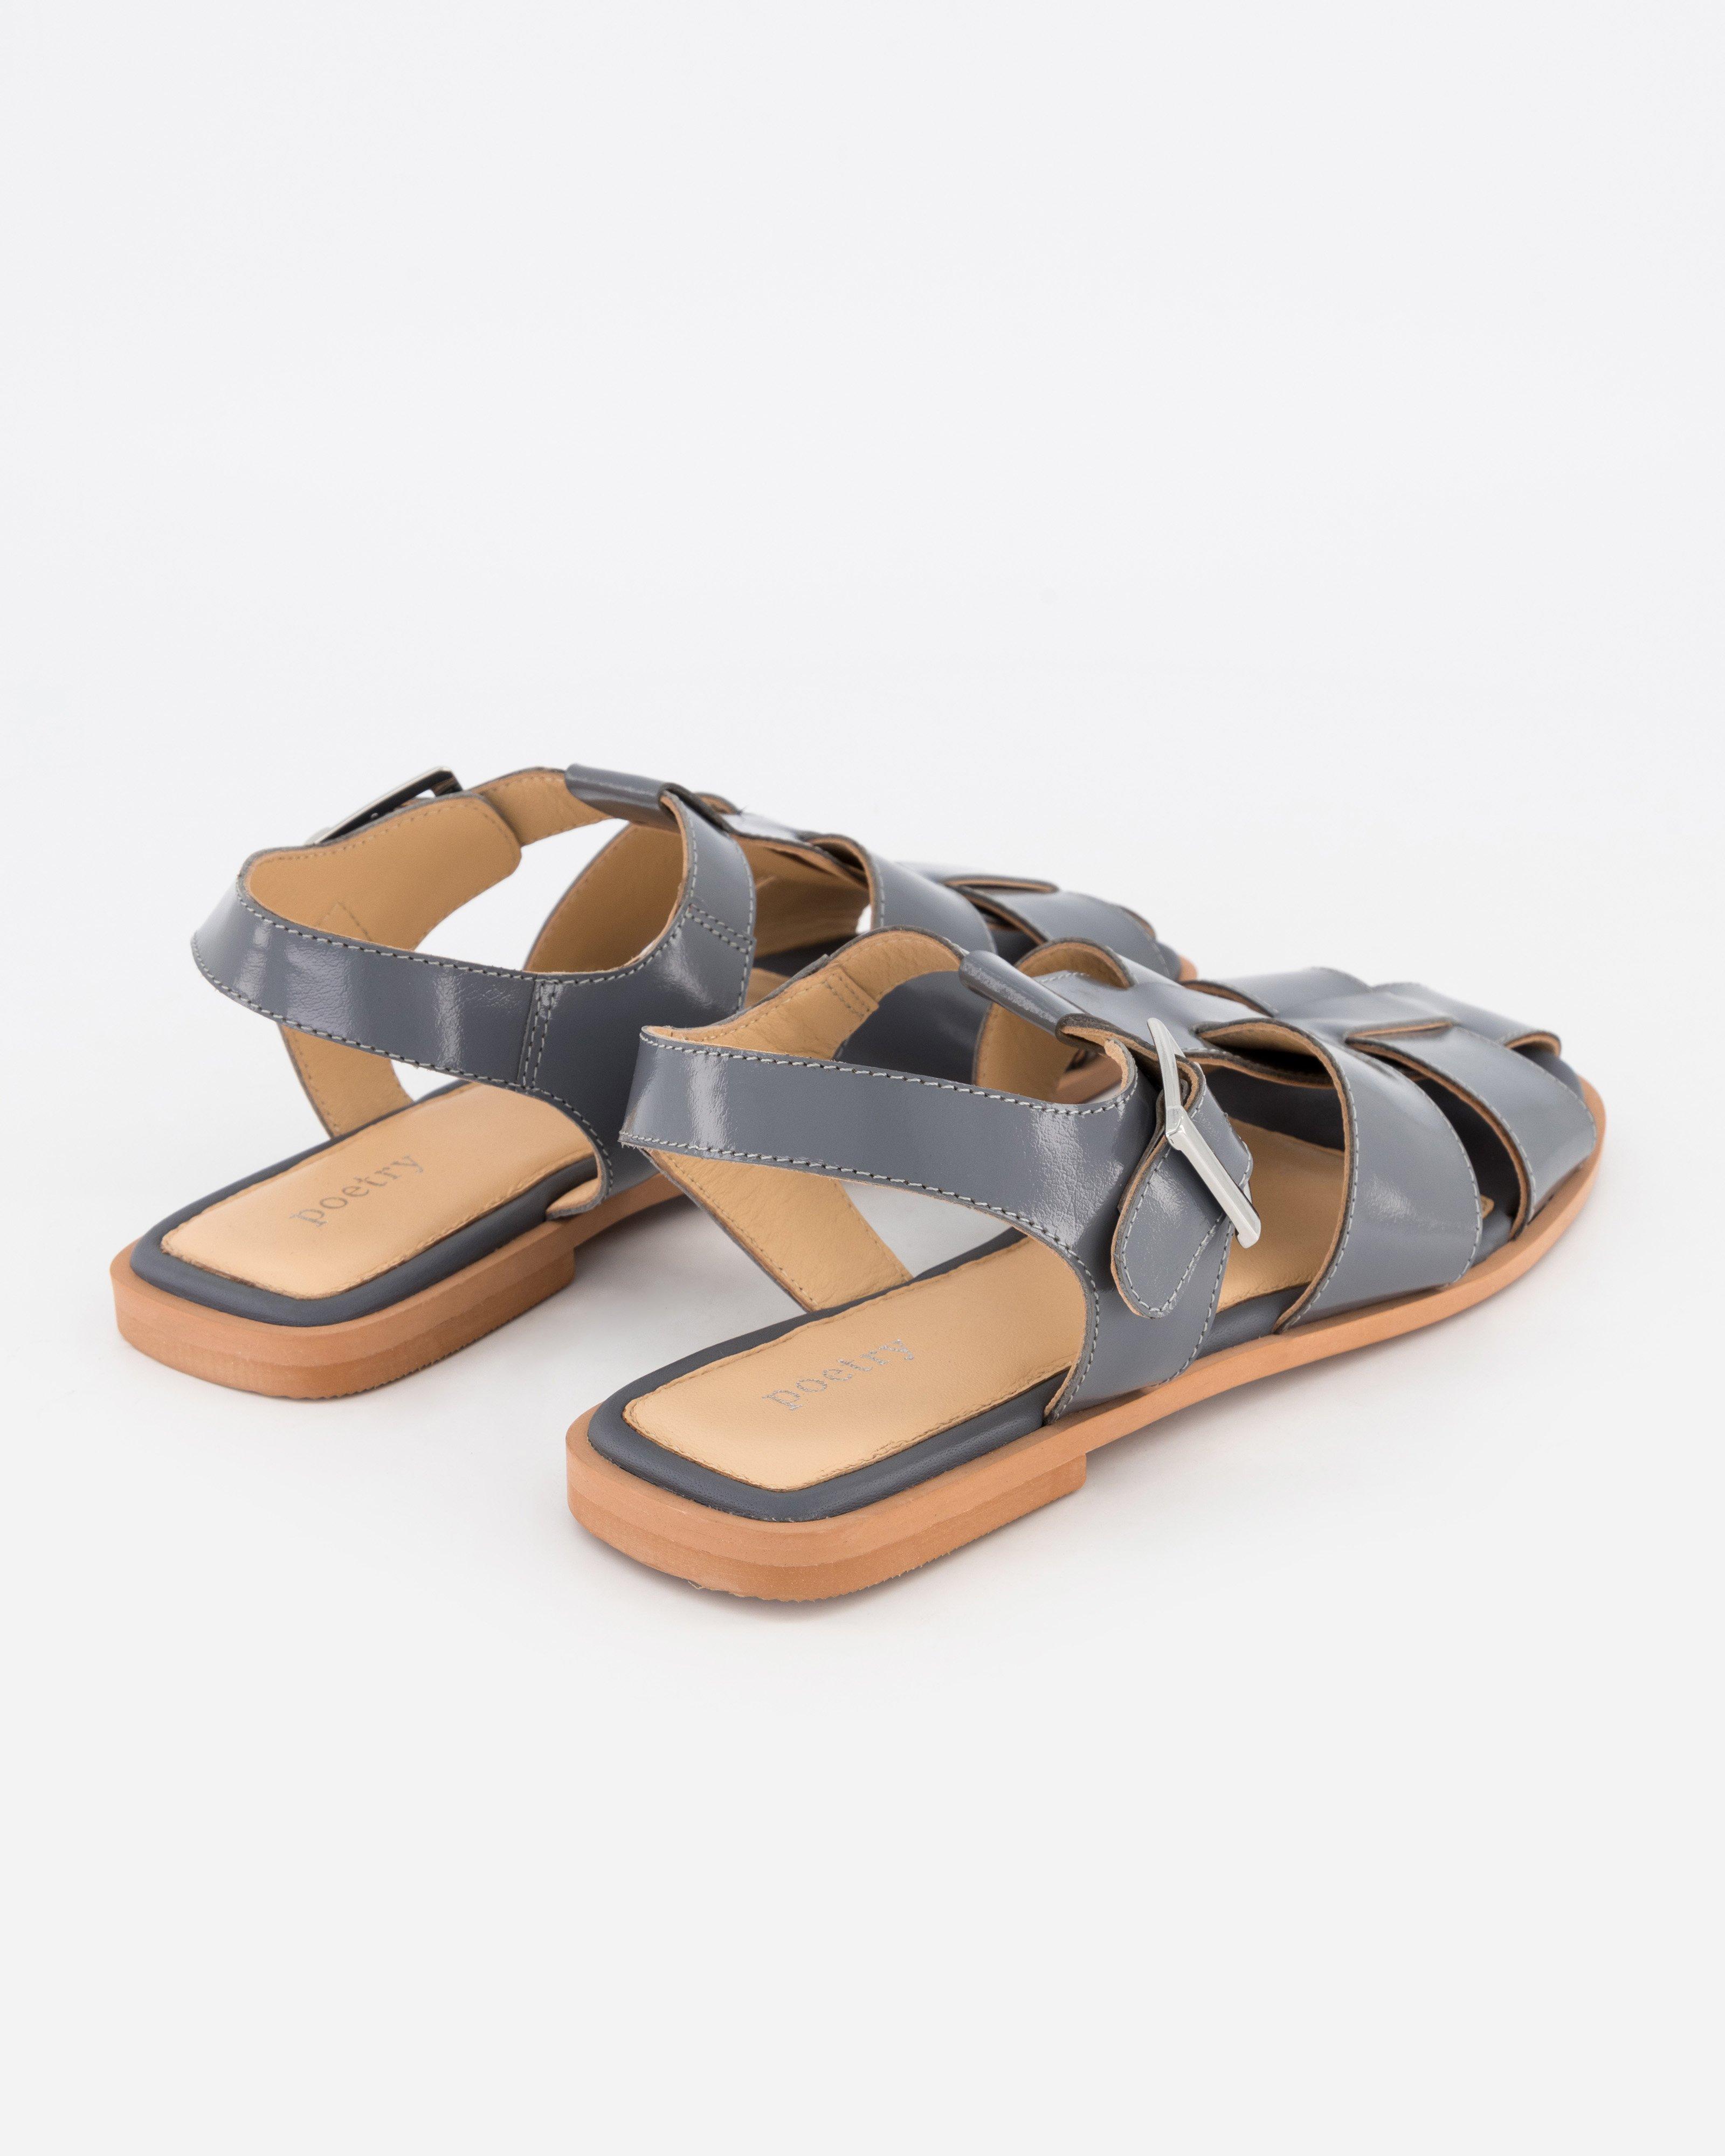 Janina Patent Sandal - Poetry Clothing Store